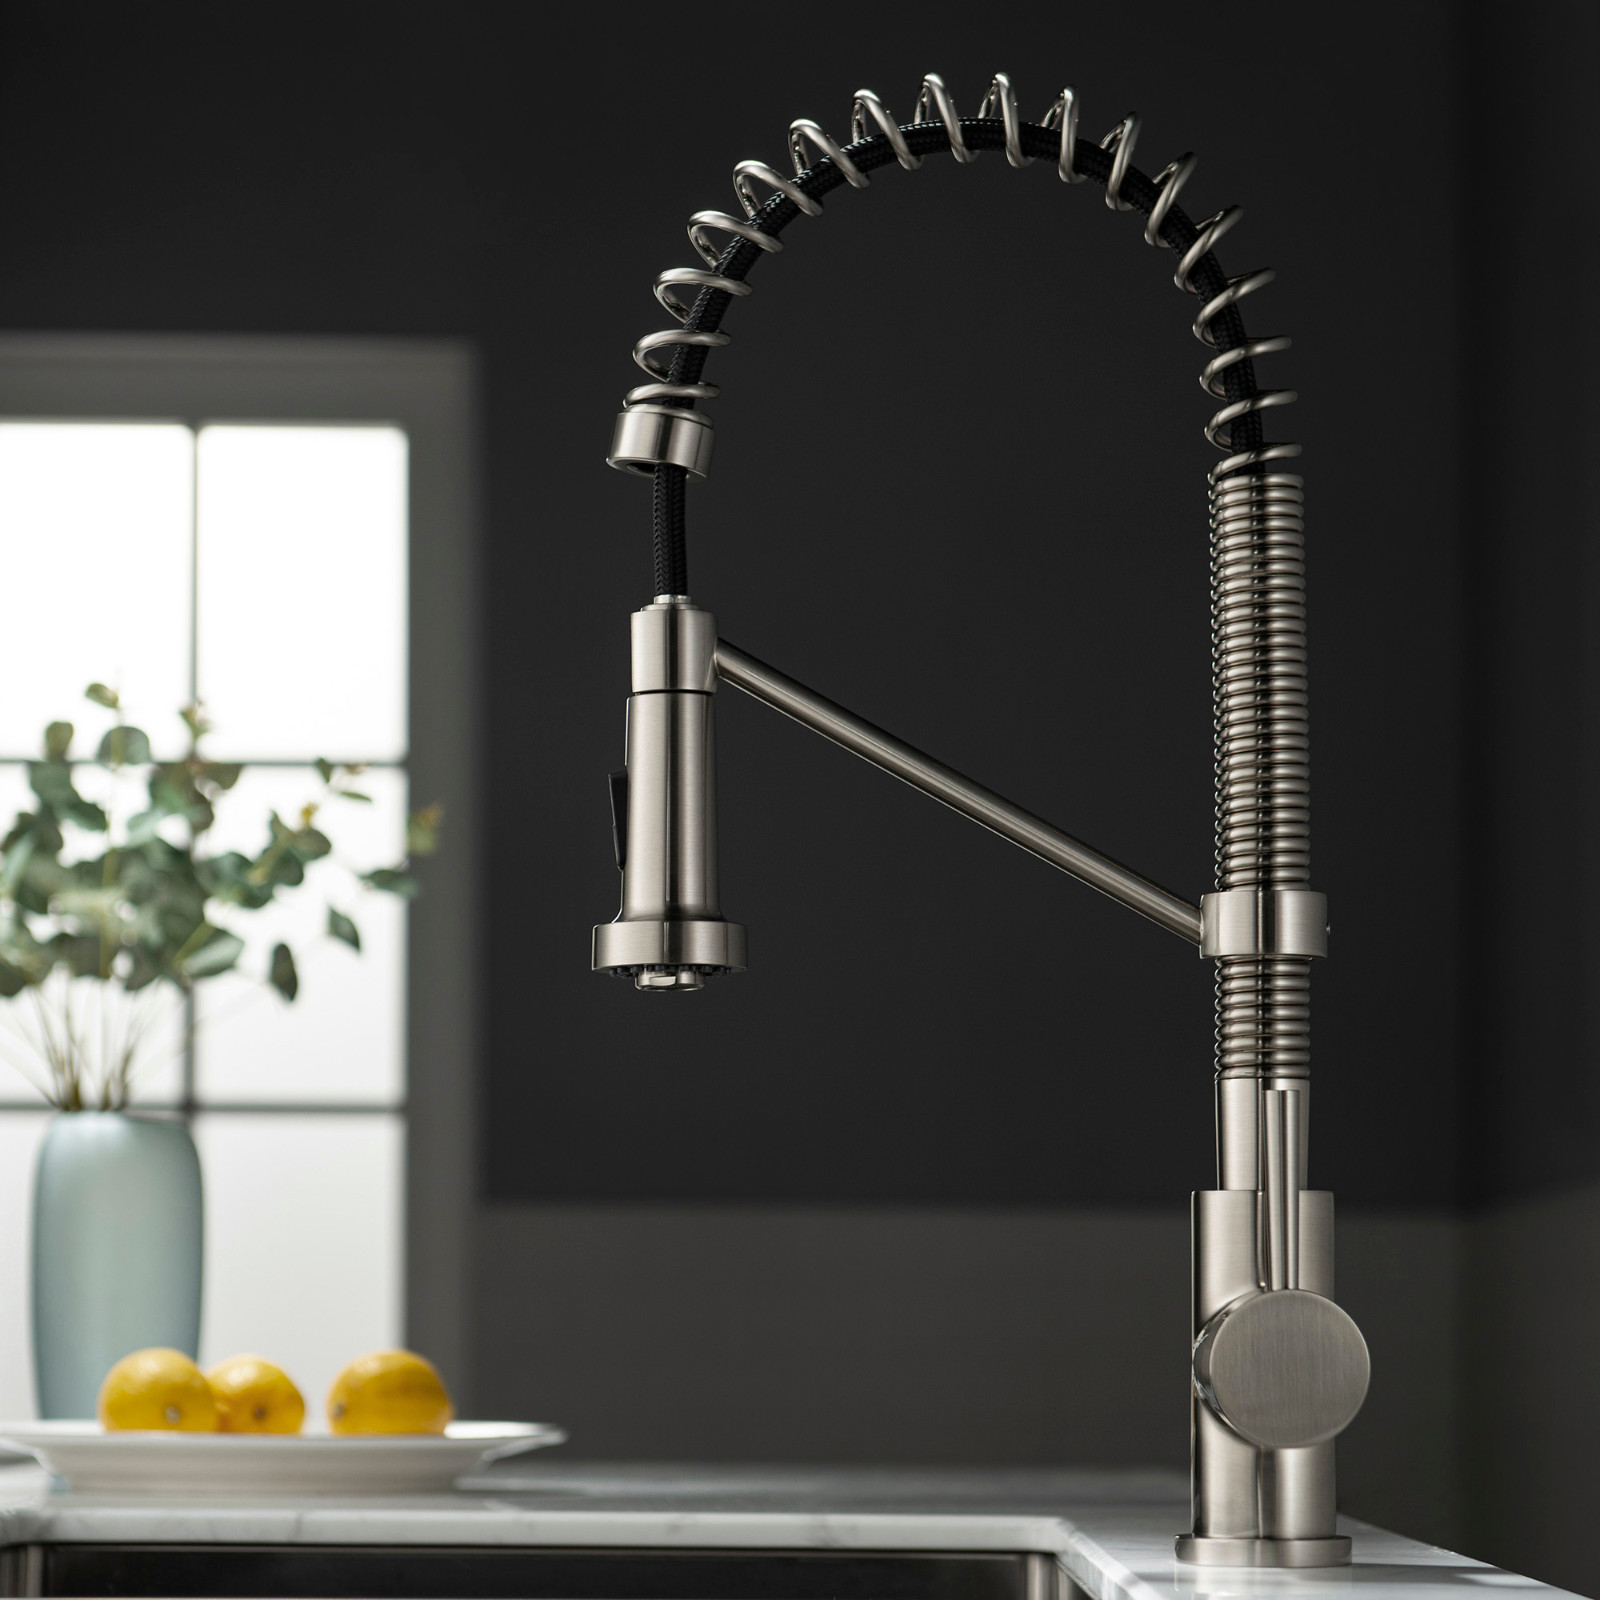  WOODBRIDGE WK010203BN Stainless Steel Single Handle Spring Coil Pre-Rinse Kitchen Faucet with Pull Down Sprayer, Brushed Nickel Finish_9474